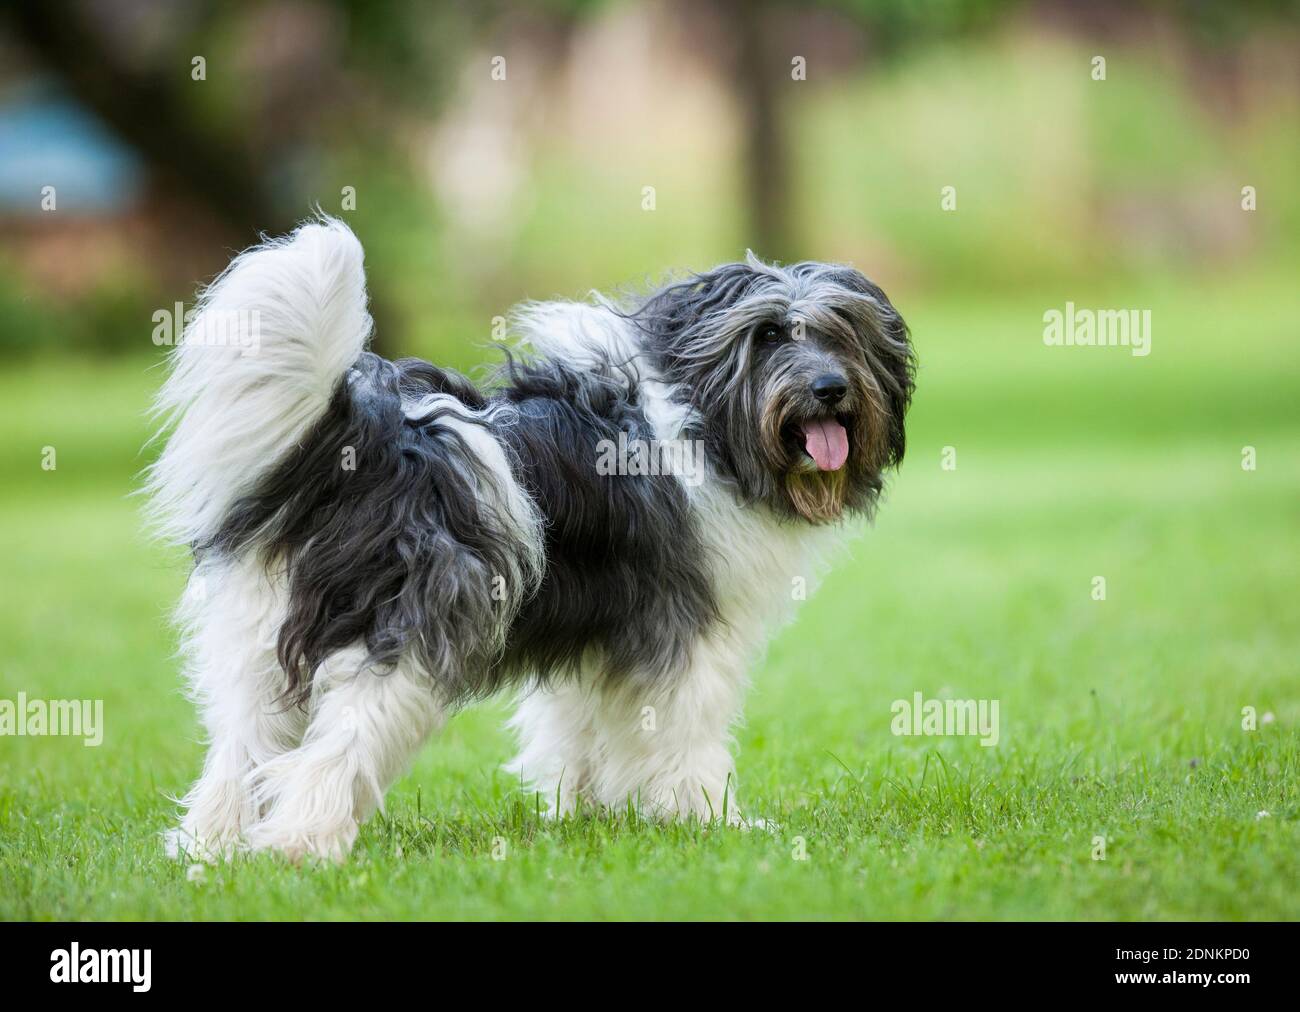 Polish Lowland Sheepdog. Adult dog standing on a lawn. Germany Stock Photo